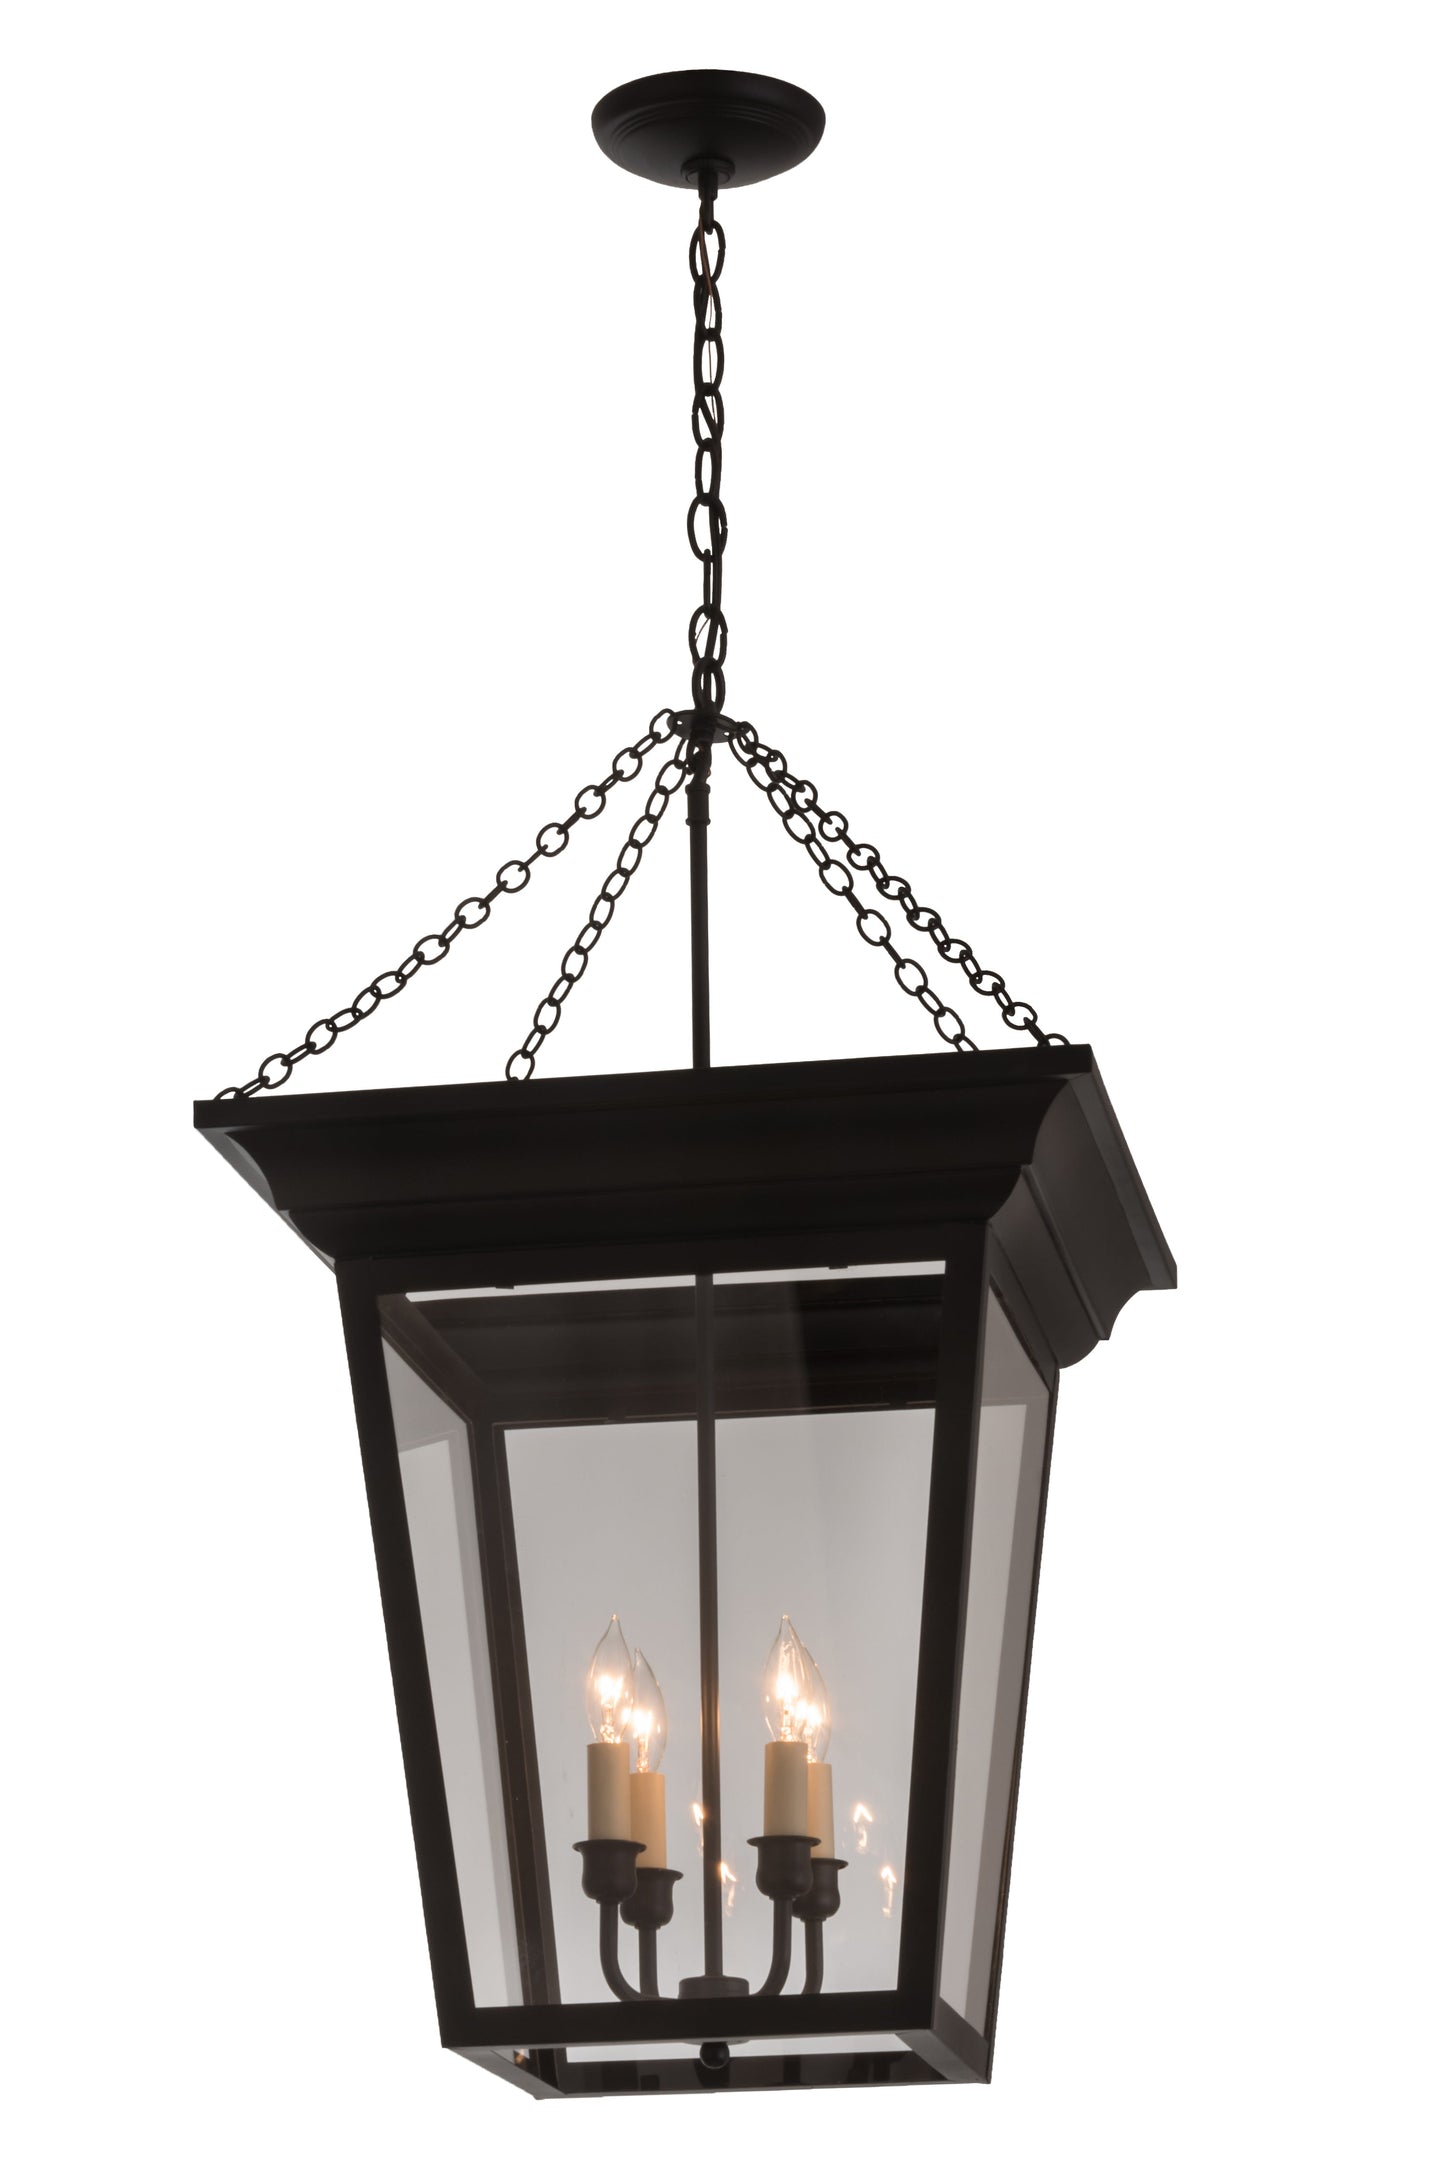 18" Square Arkley Pendant by 2nd Ave Lighting